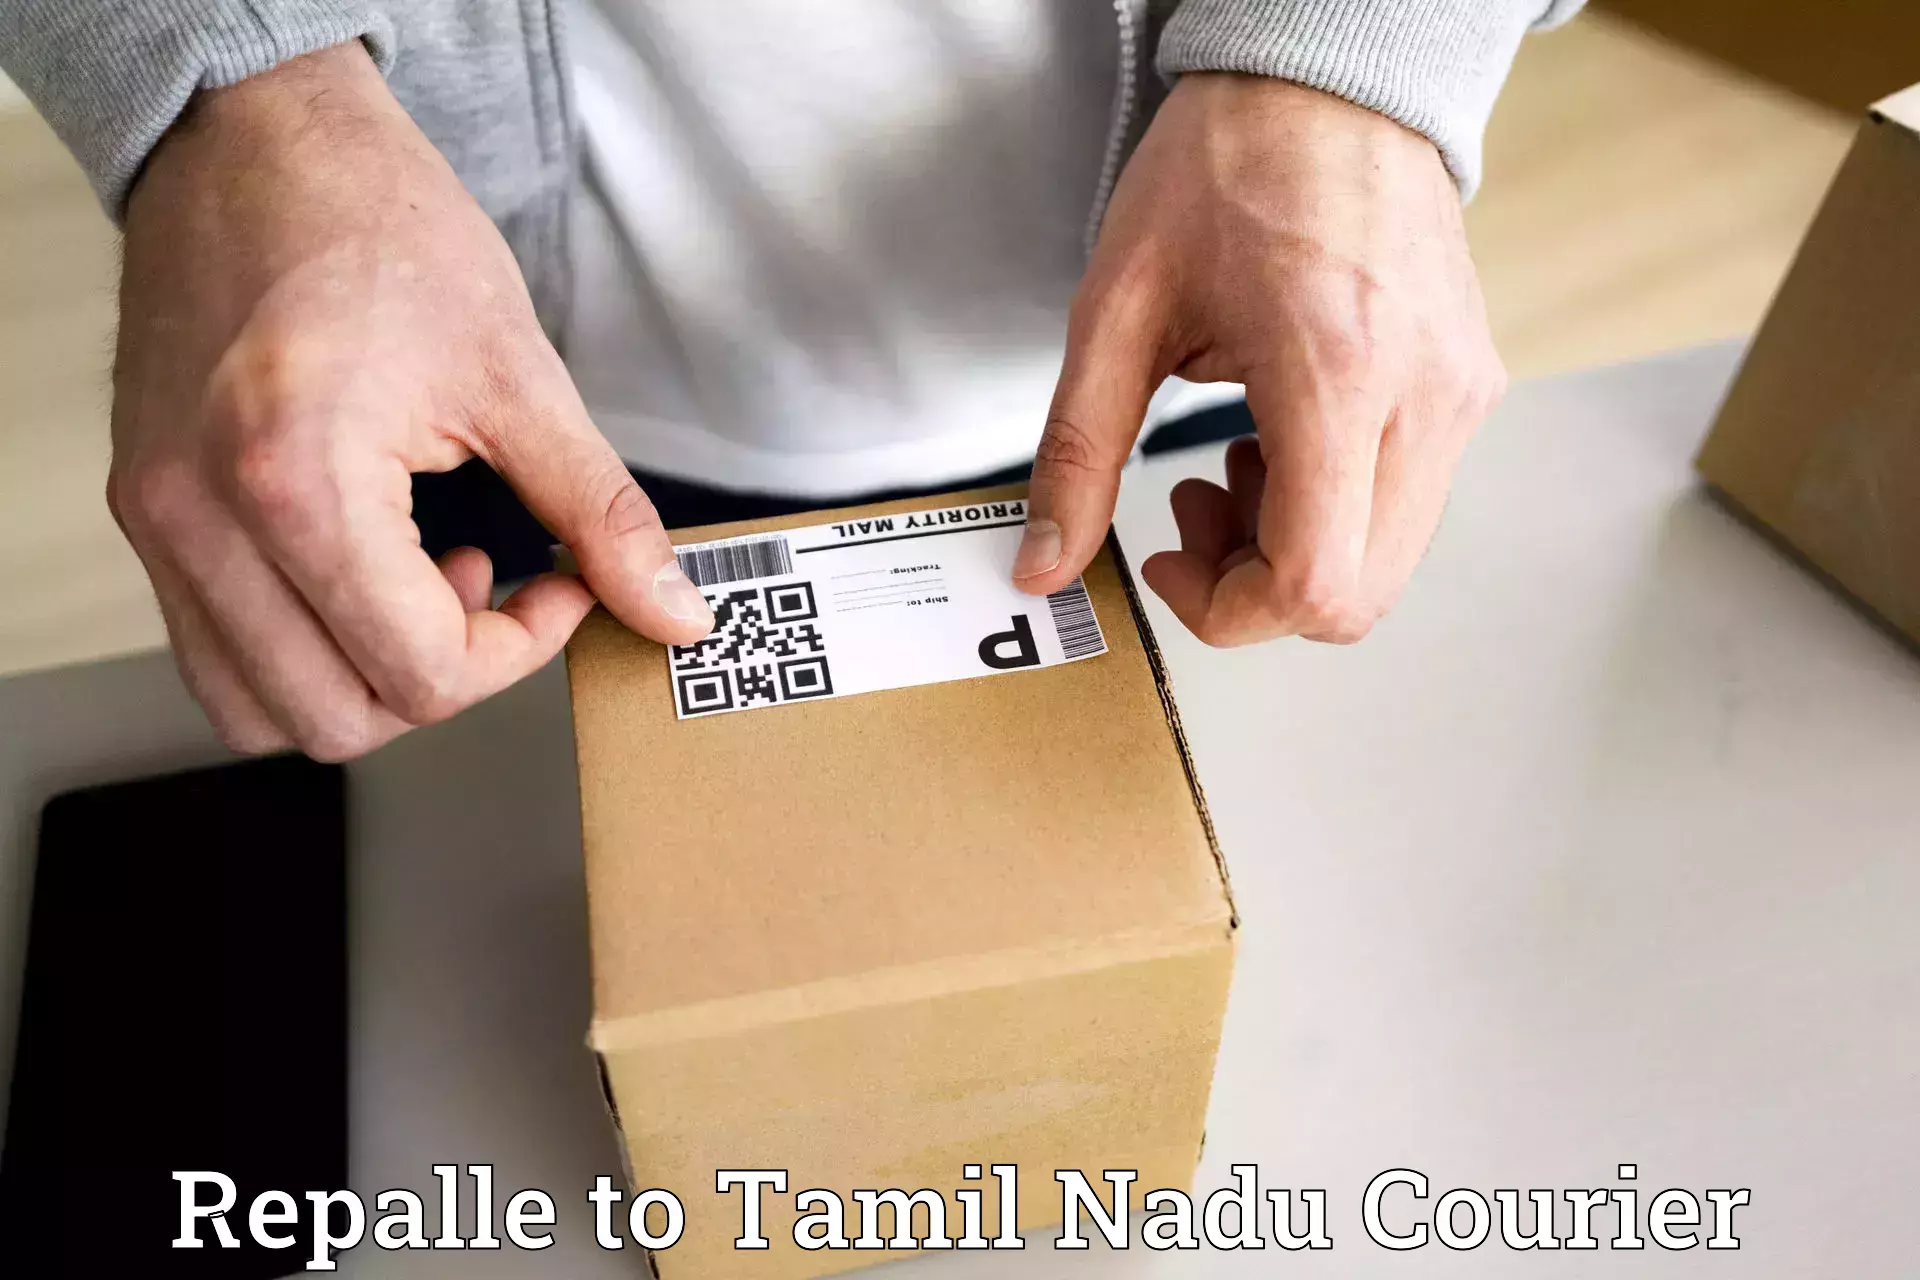 Easy access courier services Repalle to Kangeyam